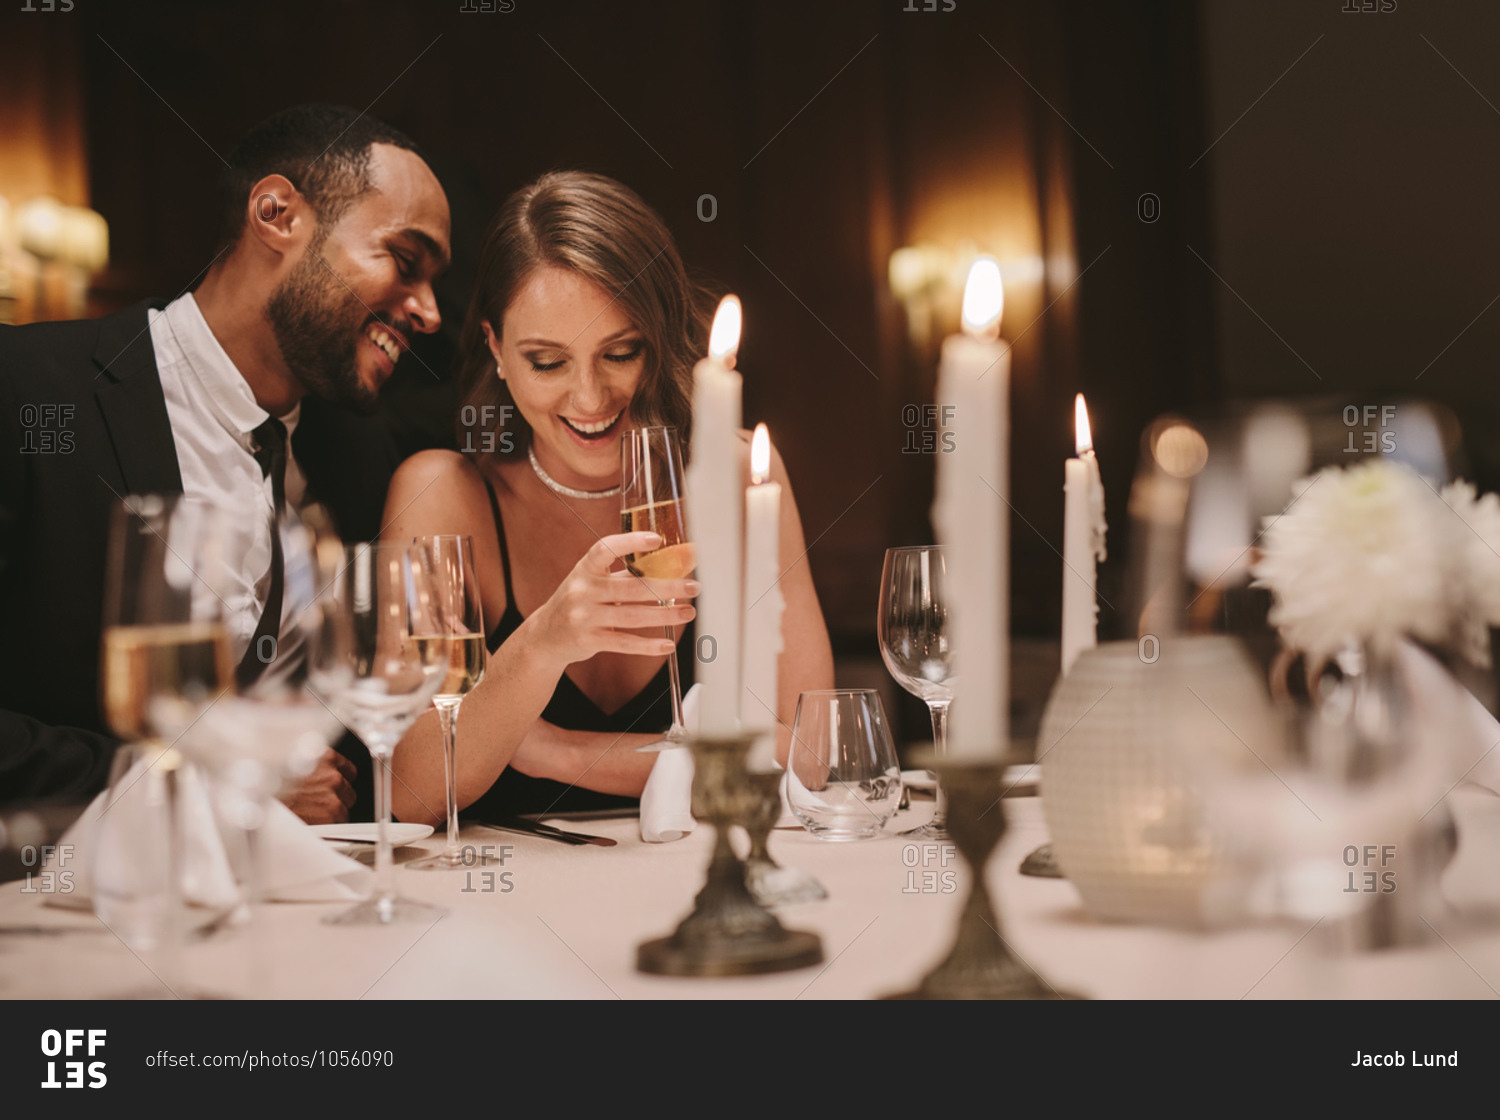 Young couple sitting at dining table with candles having wine. Loving man and woman at a gala dinner party.